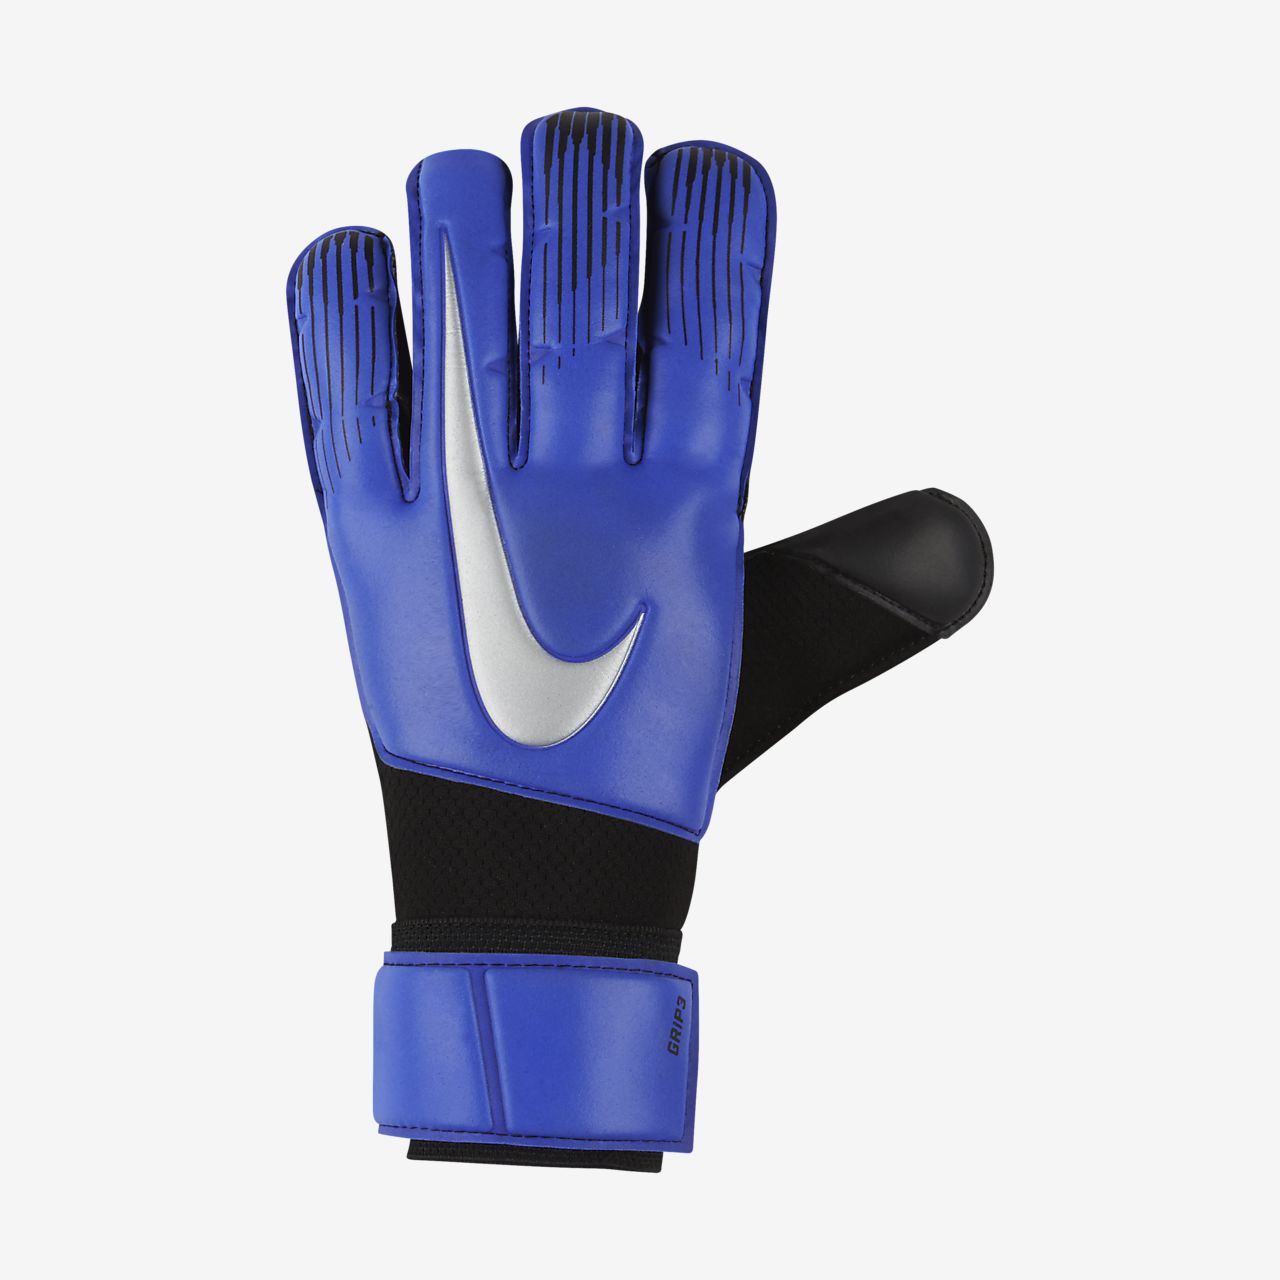 yellow and blue football gloves